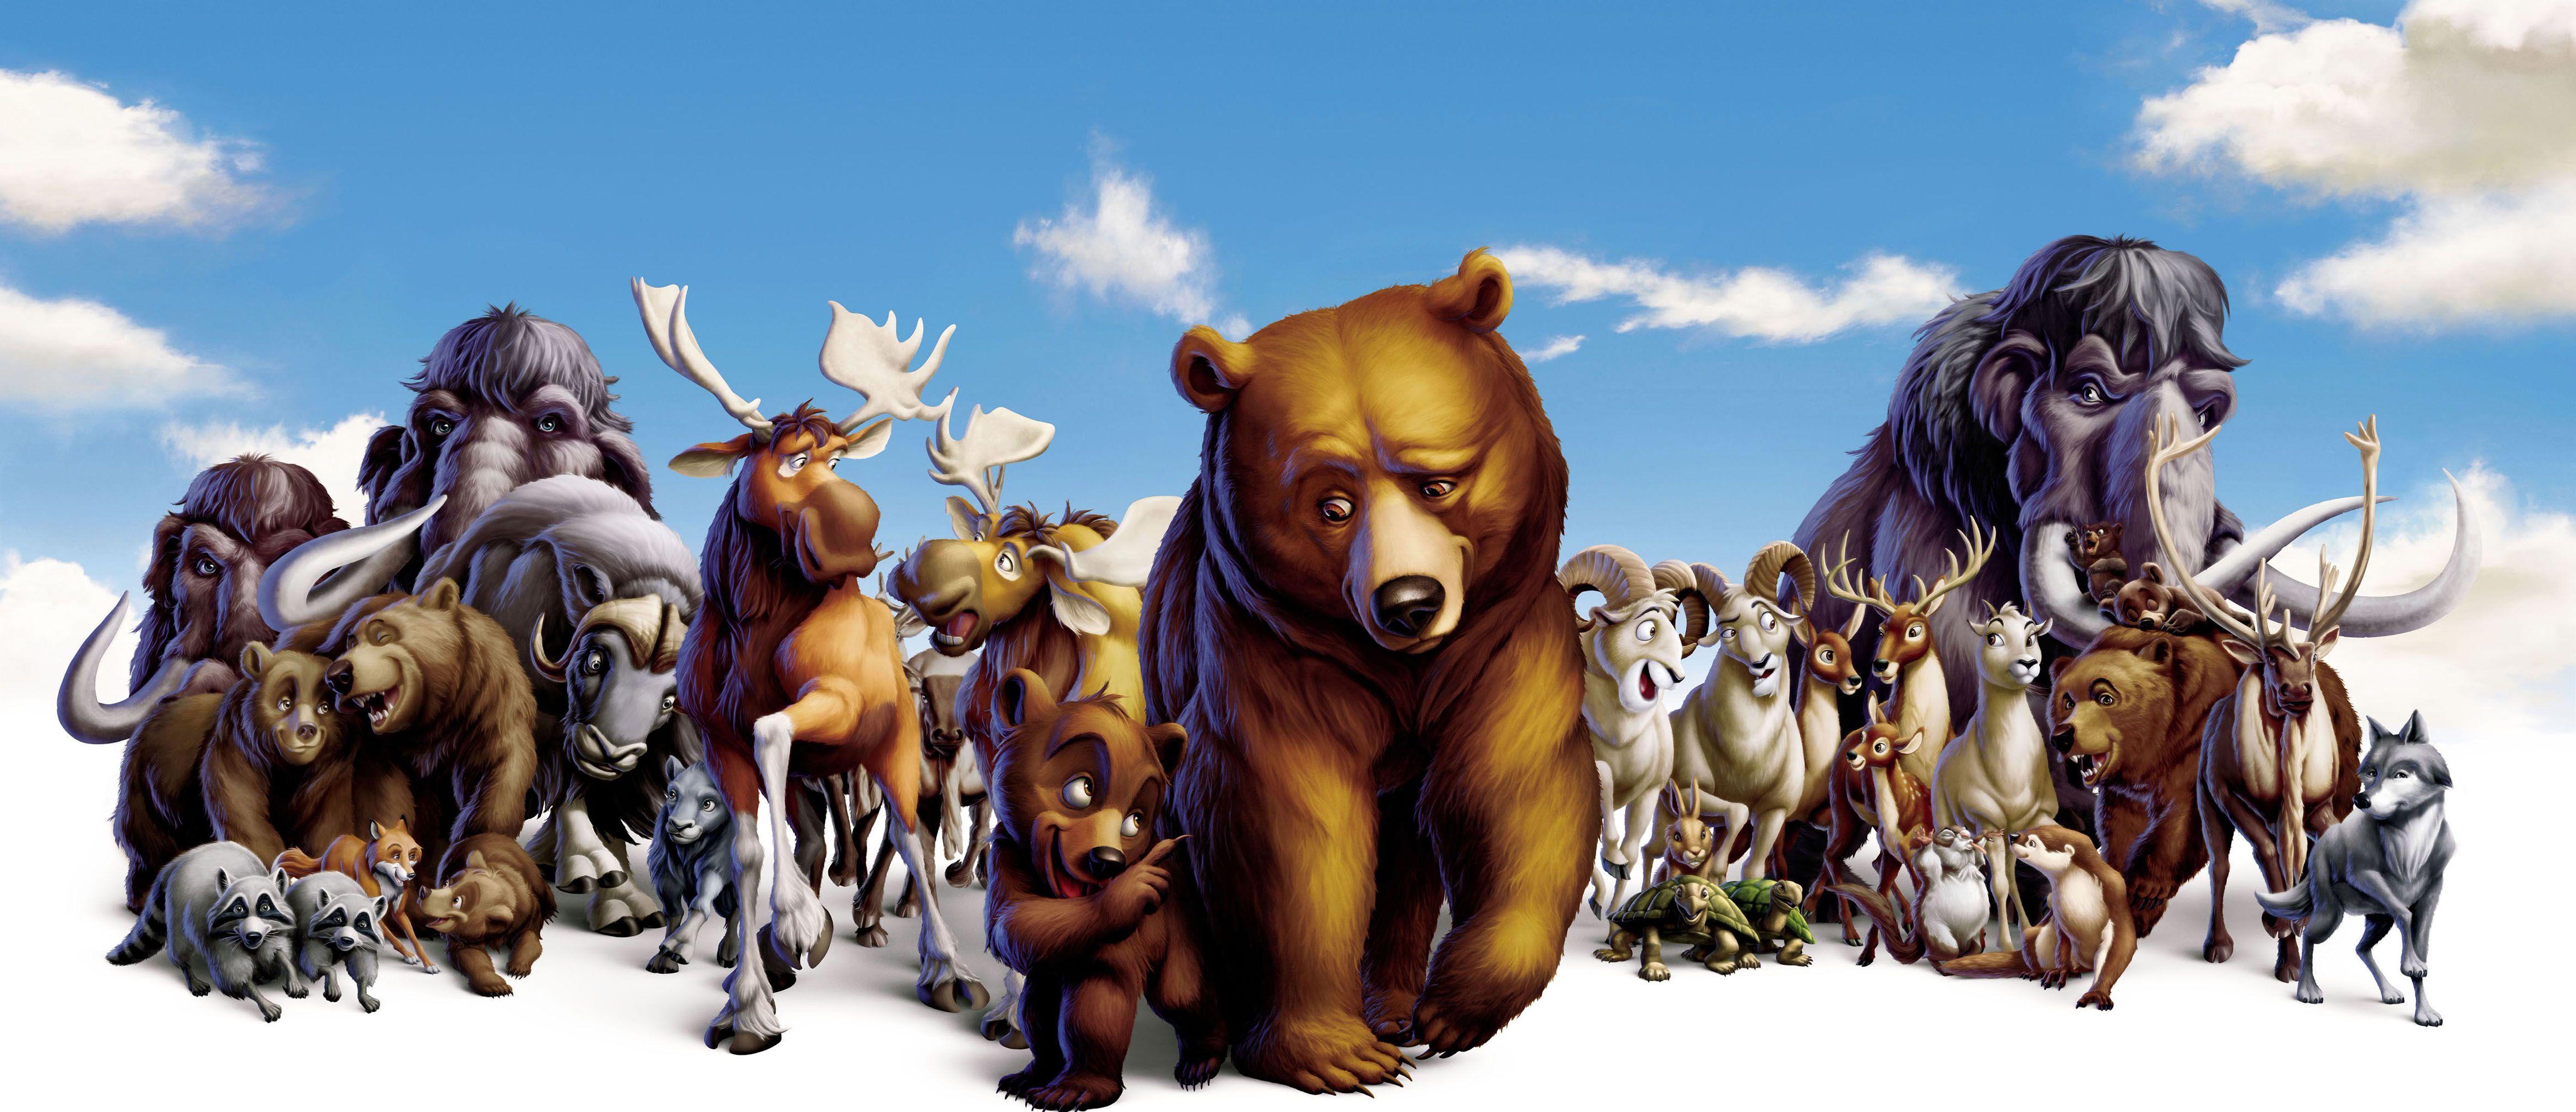 HQ 5000x2158 Resolution, 01 06 Brother Bear